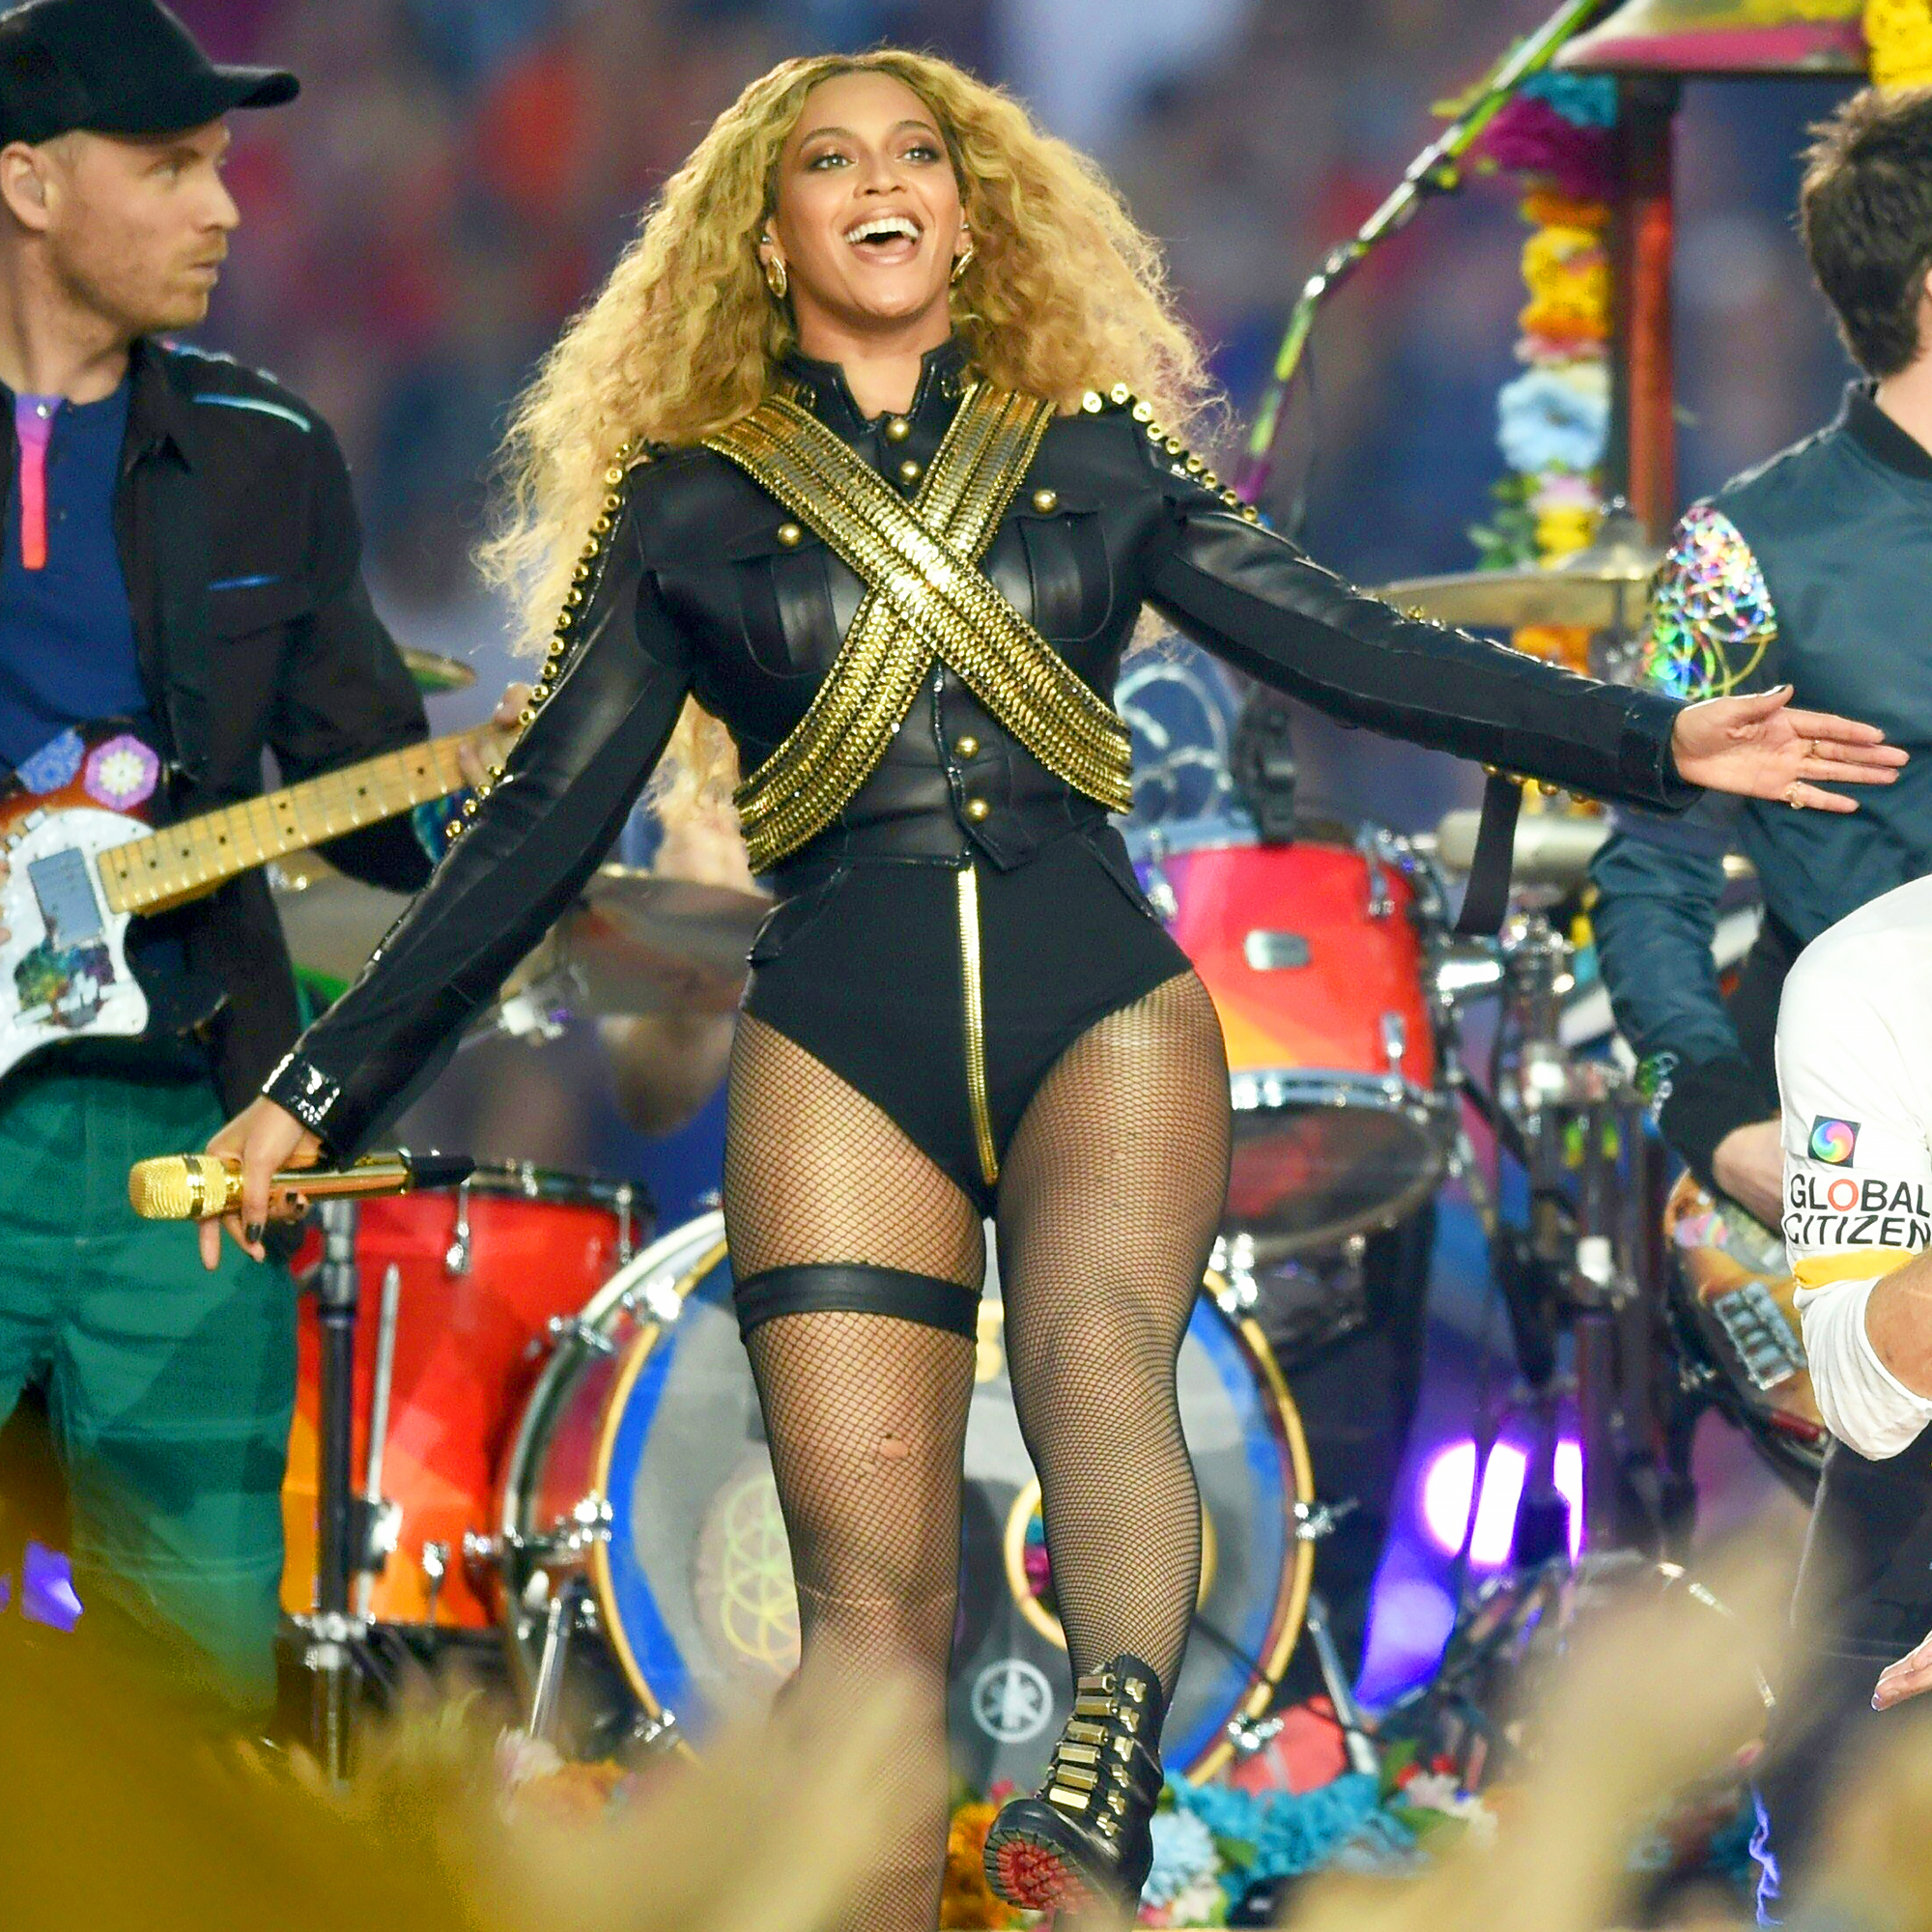 15 Best Super Bowl Halftime Shows of All Time